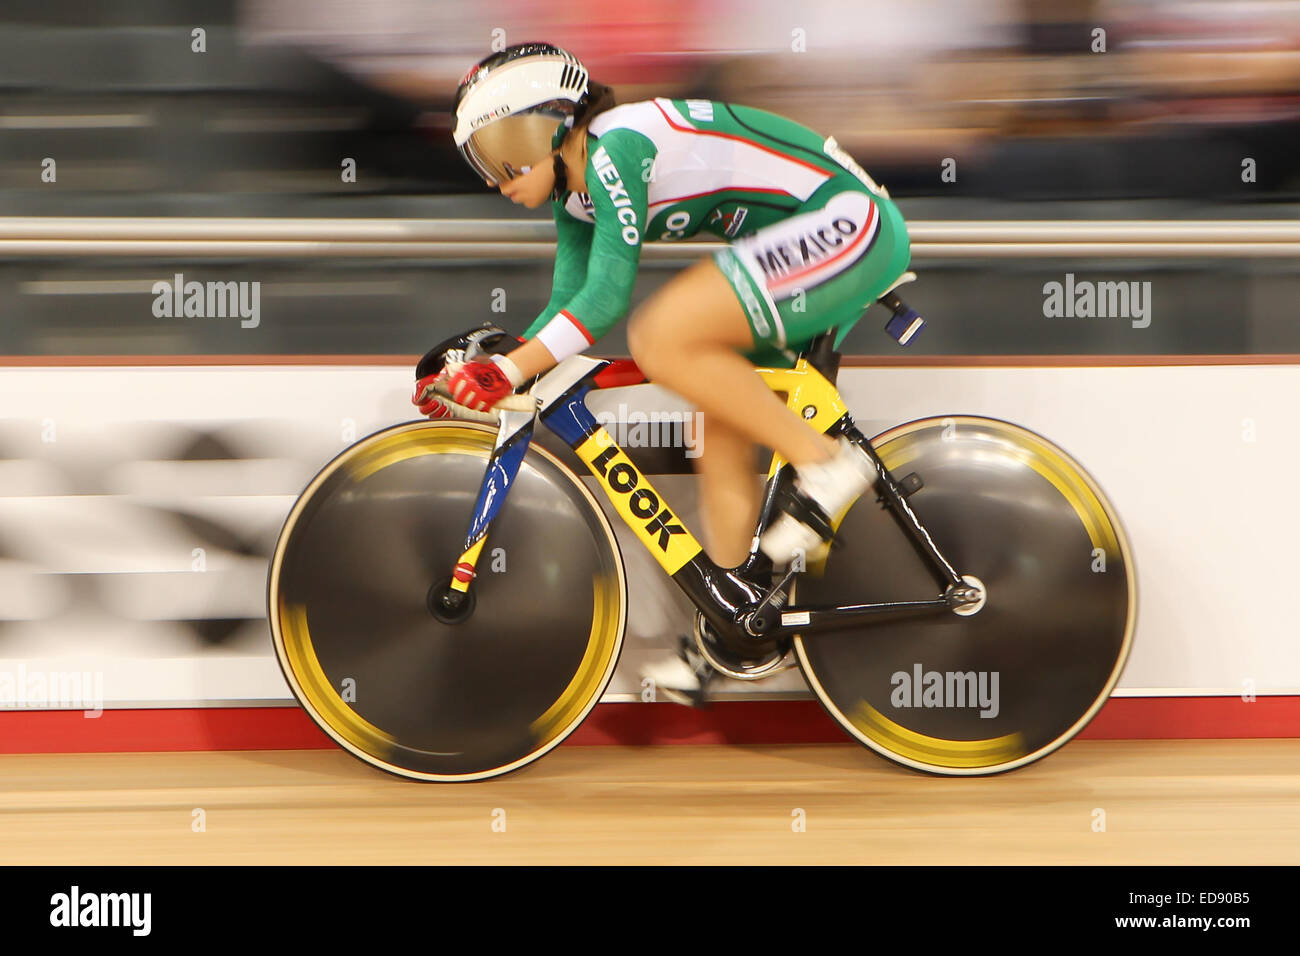 Franny Maria Fong Echevarria of Mexico takes part in the Women's Sprint during Day Two of the Track Cycling World Cup at The Lee Valley Velopark in Stratford, London. Decemeber 6th, 2014. Robbie Stephenson / Telephoto Images Stock Photo